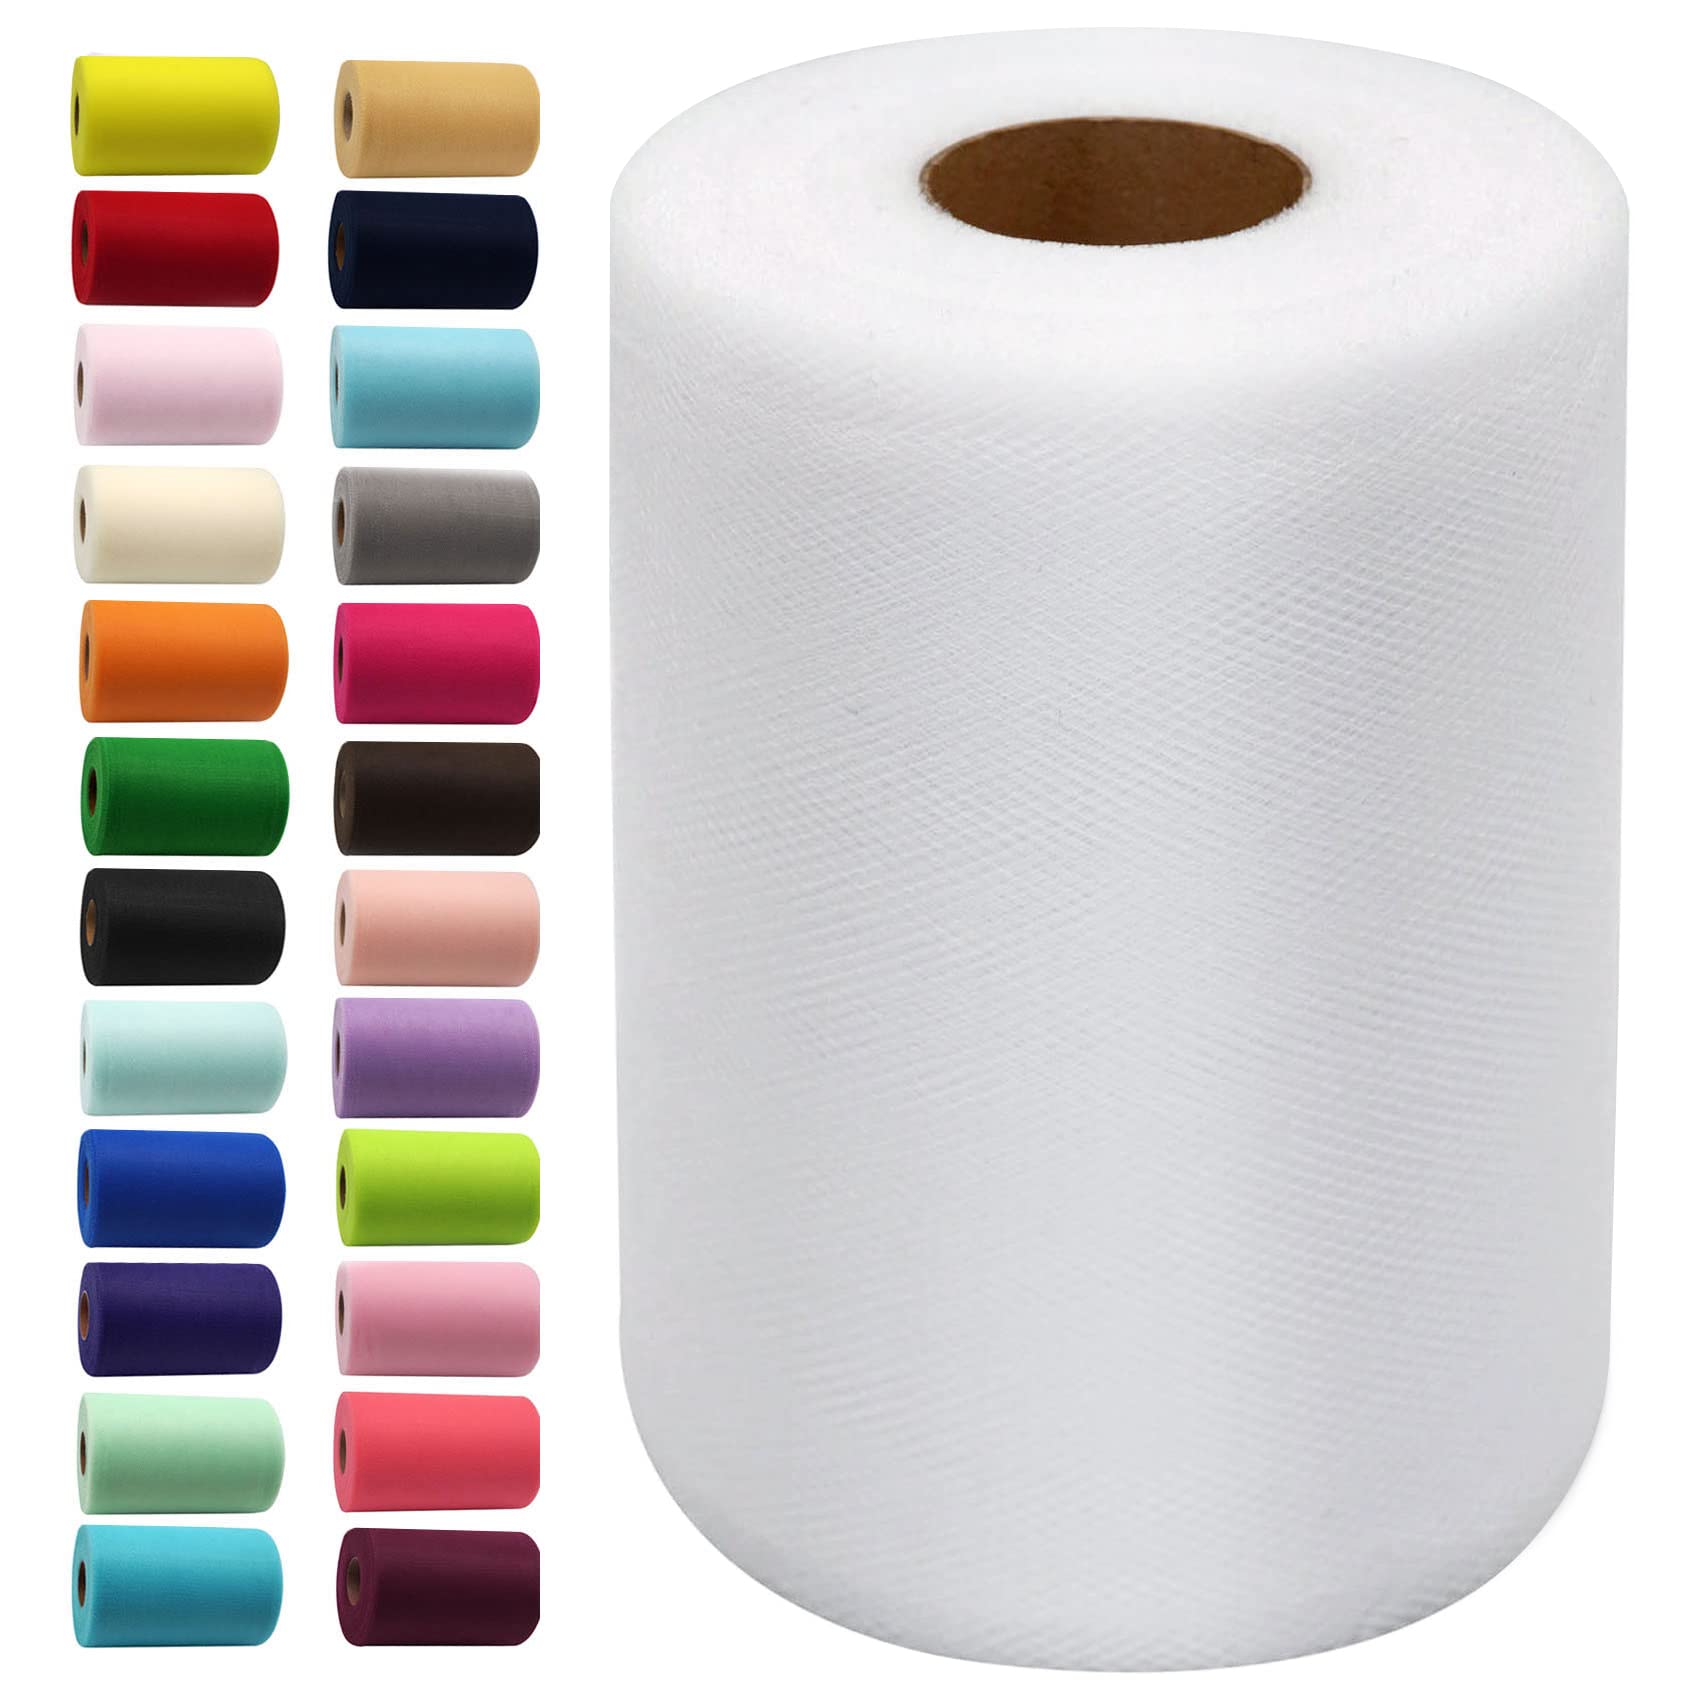 Tulle Fabric Rolls 6 Inch by 100 Yards 300 ft Tulle Macao